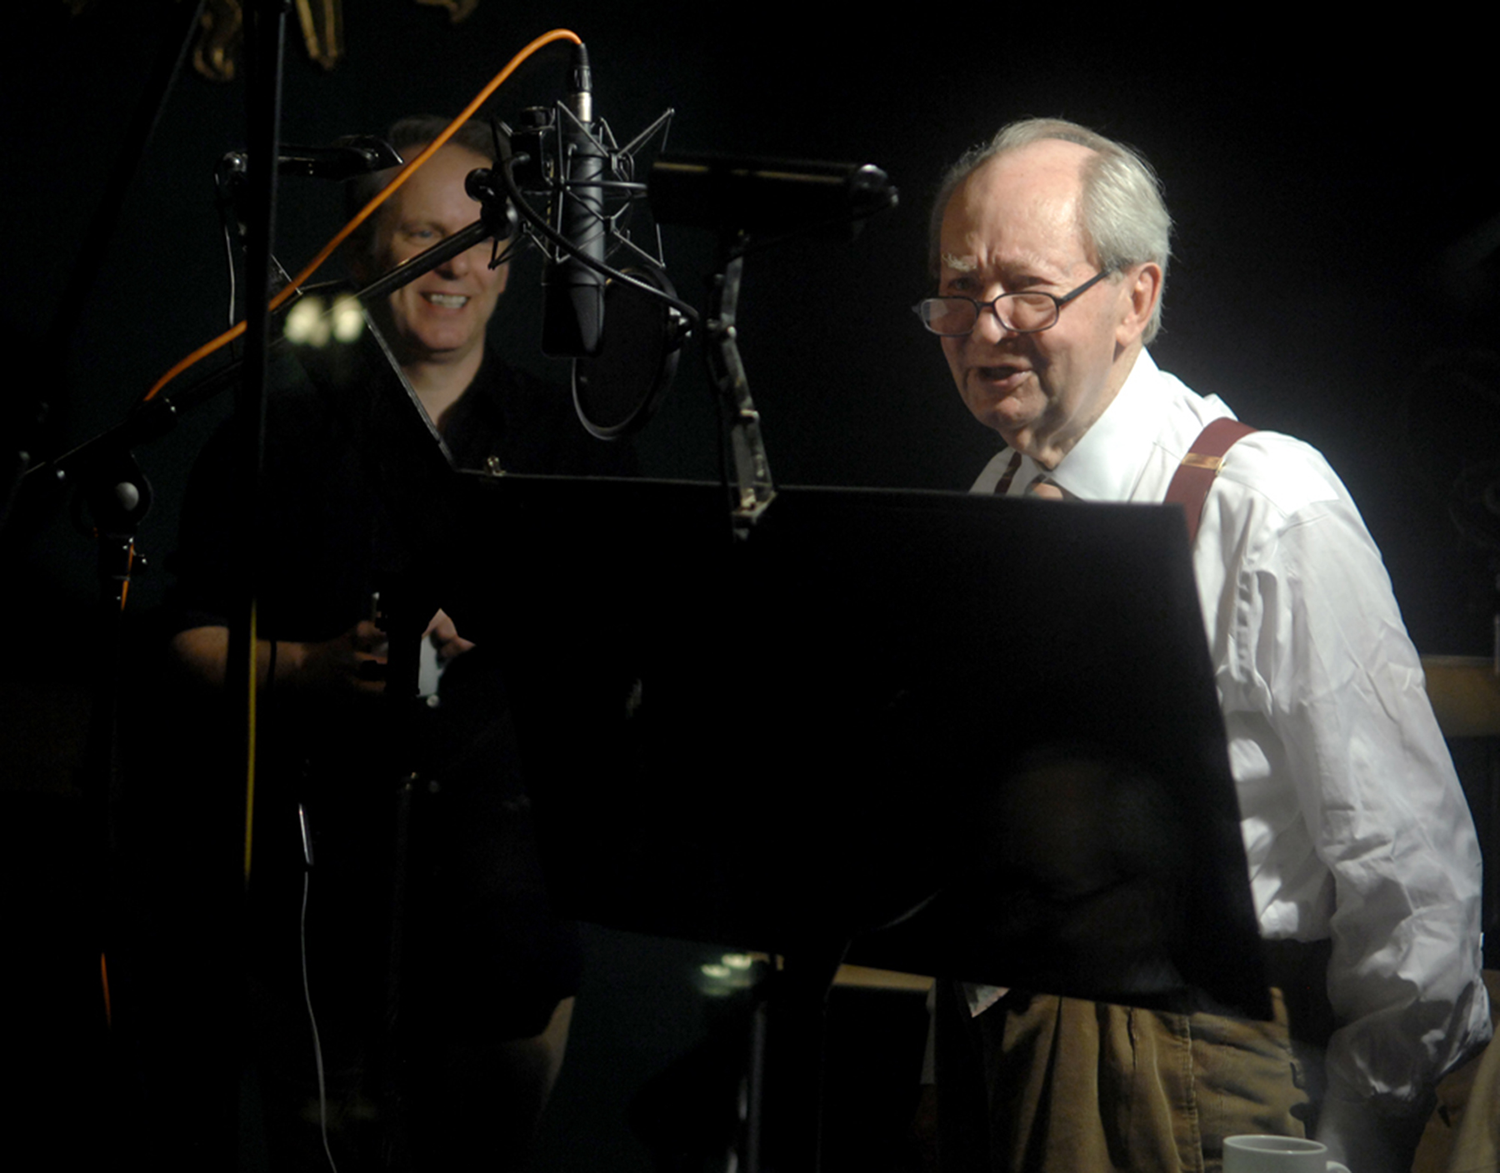 Wallace and Gromit creator Nick Park and Peter Sallis recording Wallace’s dialogue for Wallace & Gromit: The Curse of the Were-Rabbit (2005).